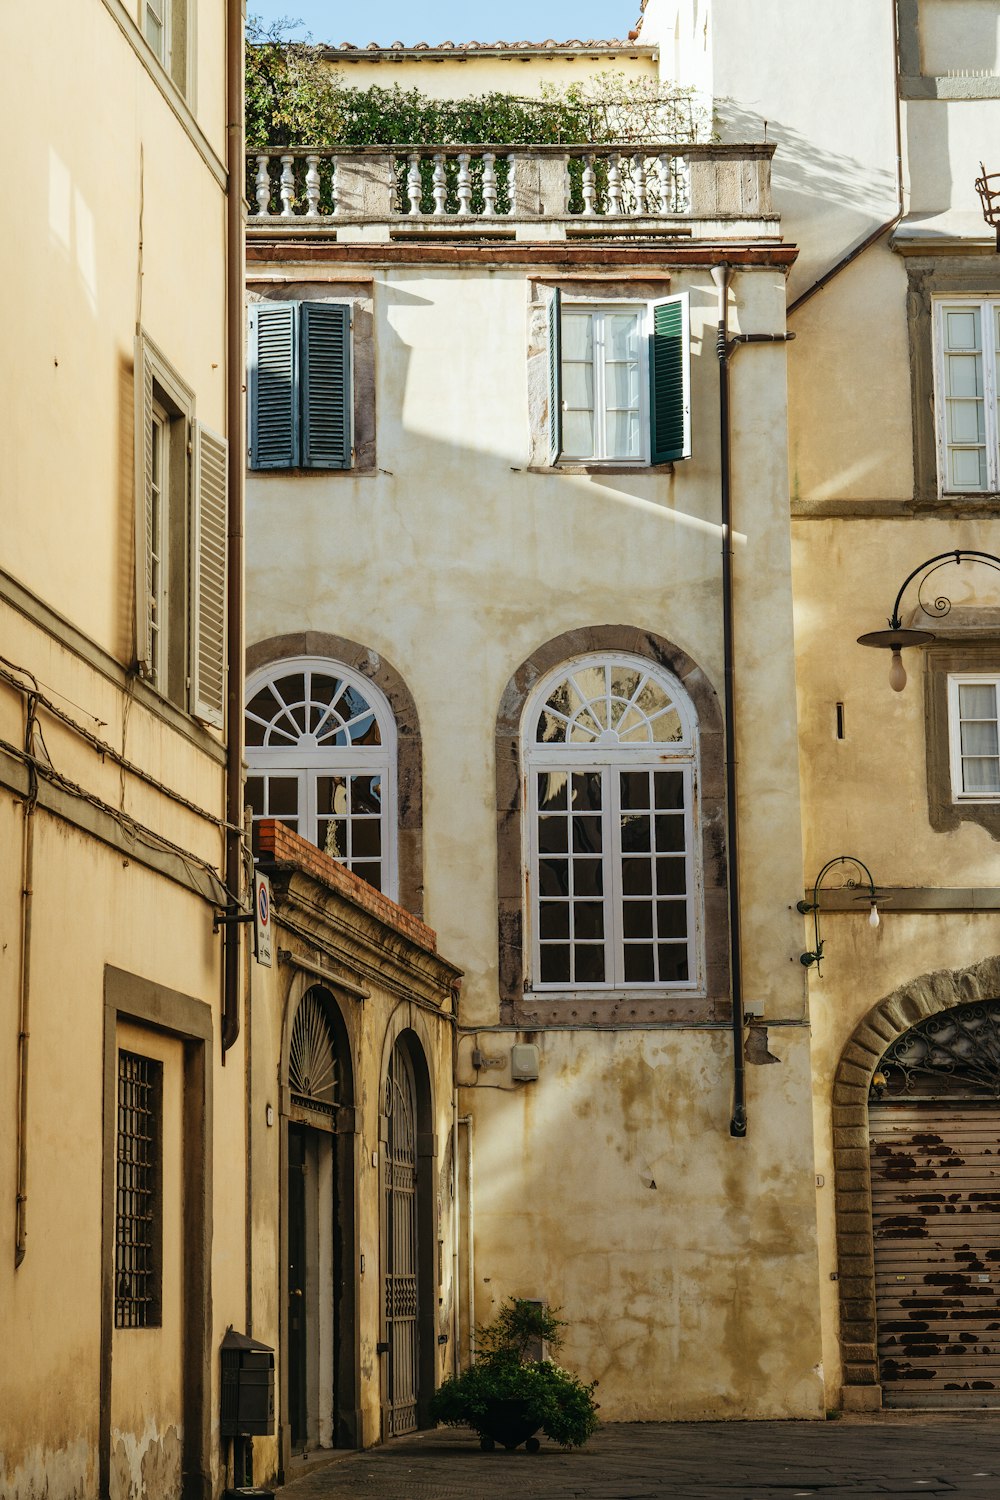 an old building with arched windows and shutters